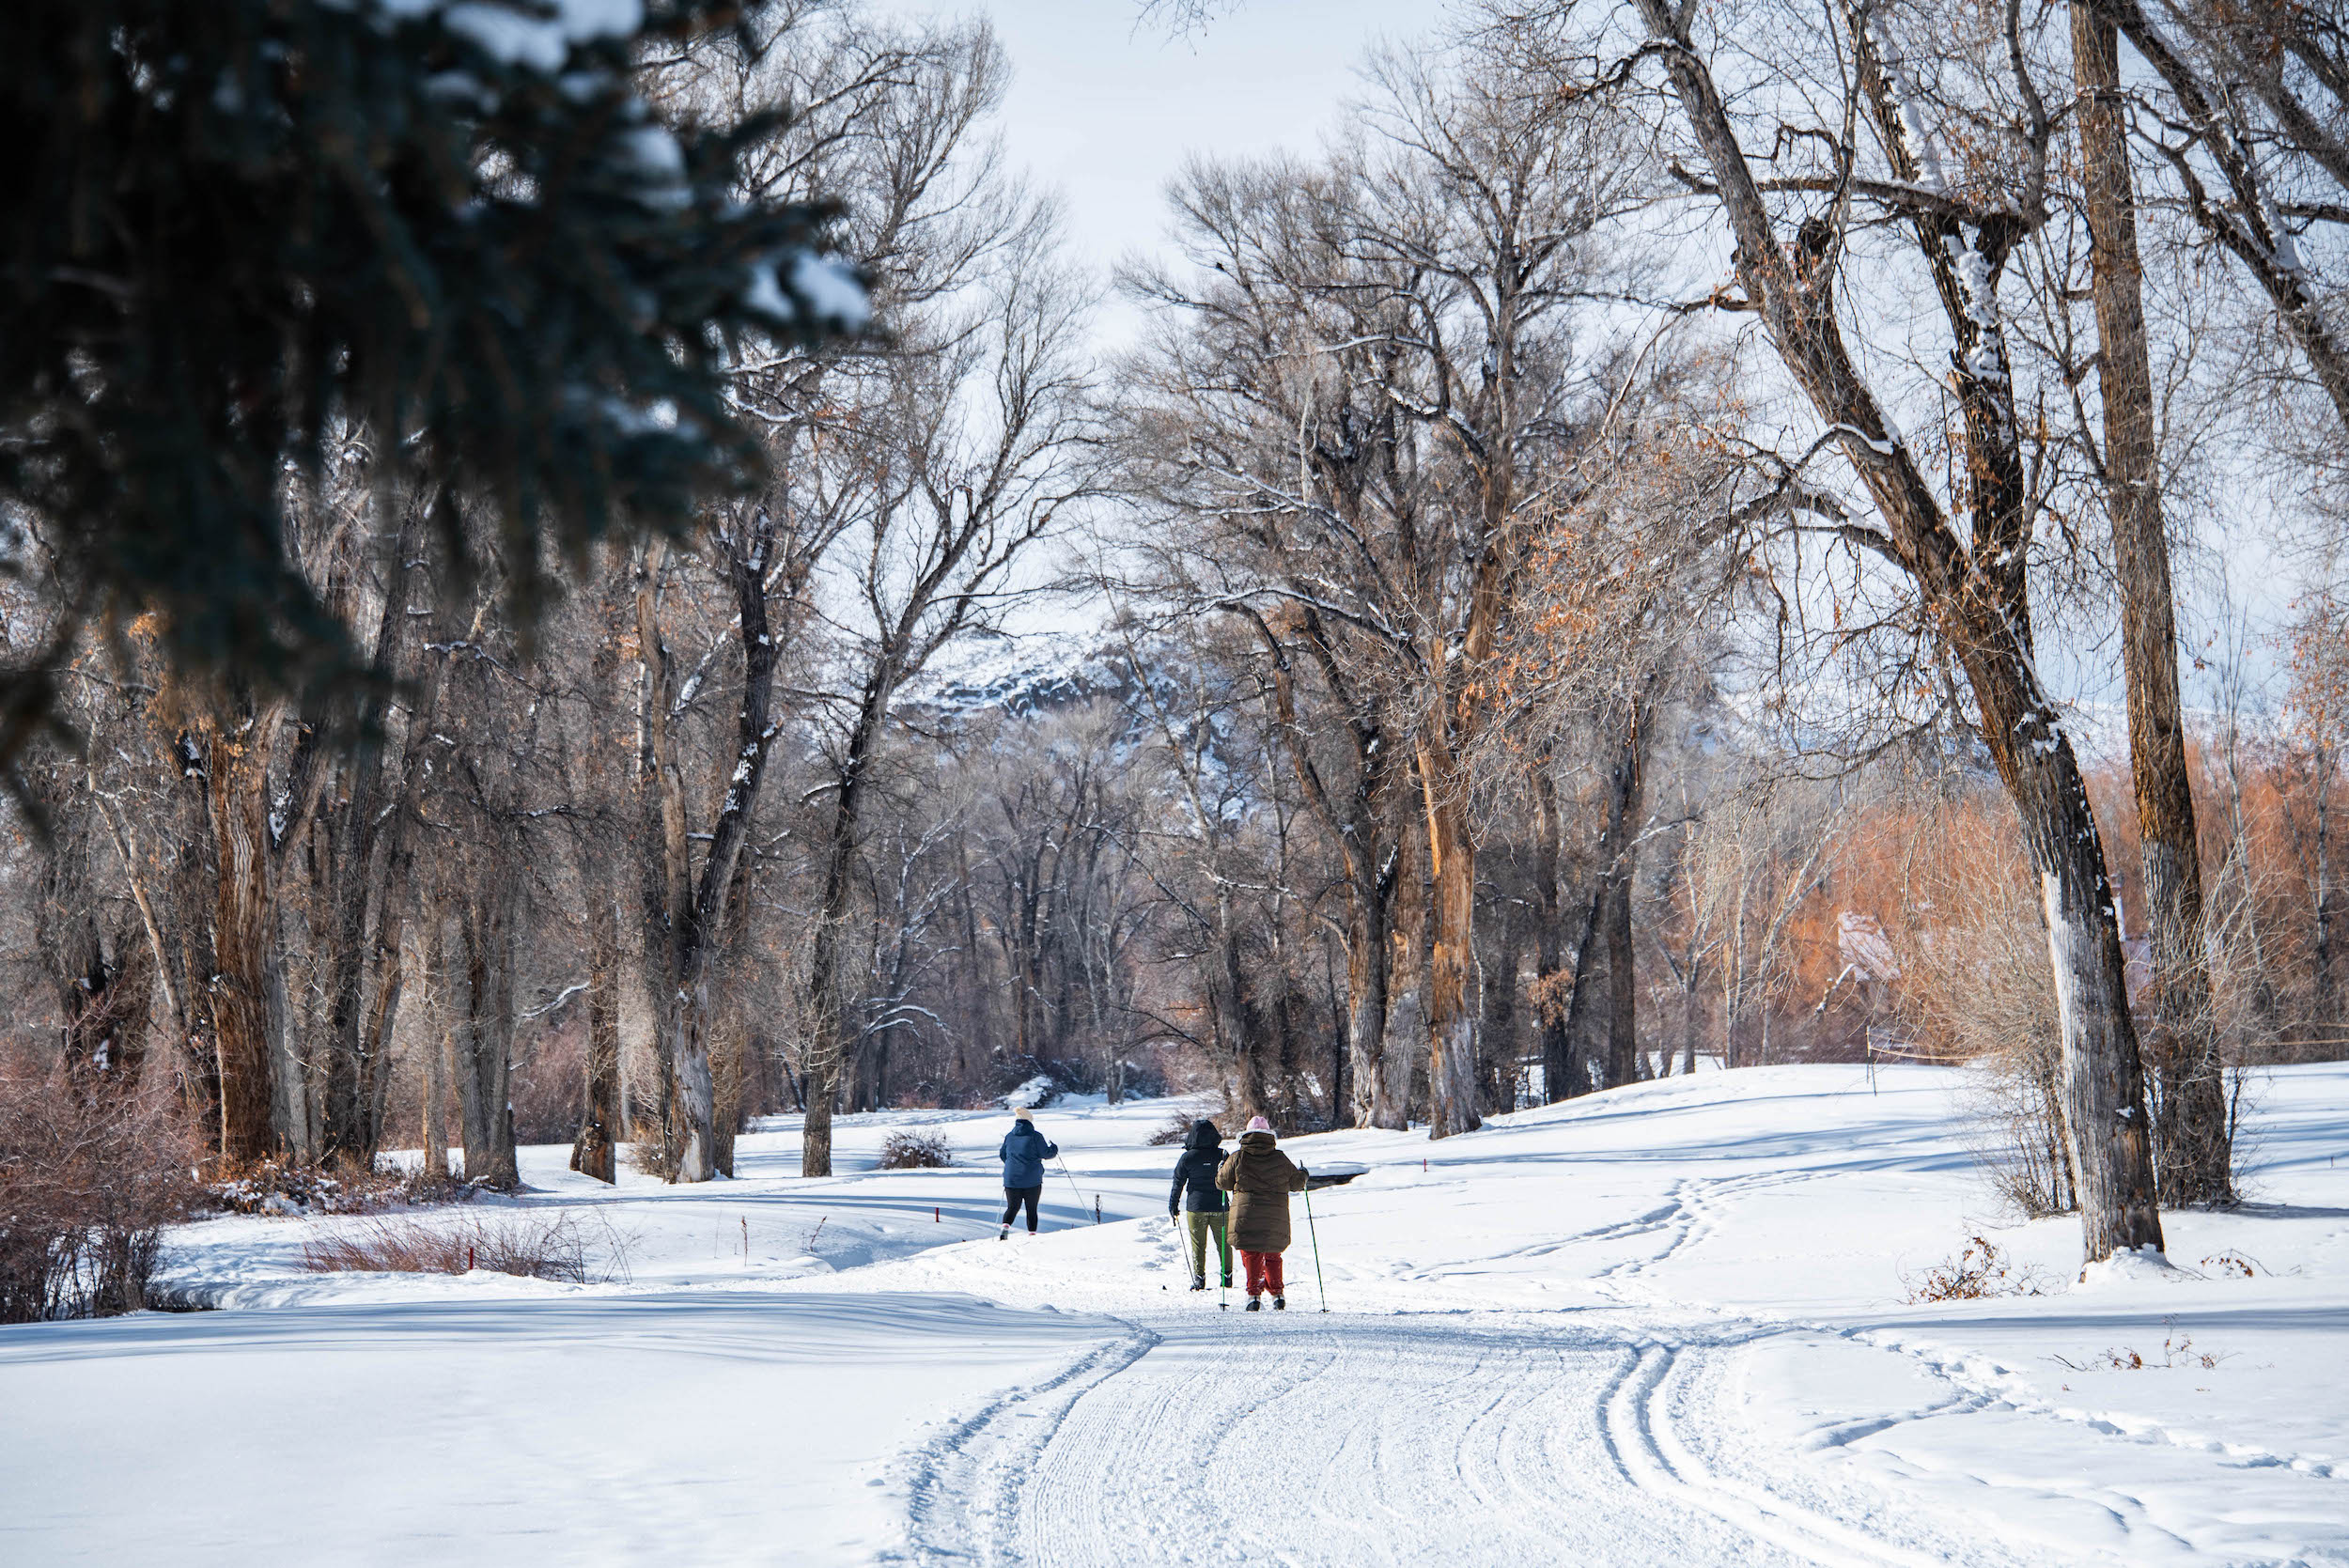 People skiing on a Nordic track in Gunnison. Van Tuyl is one of several Gunnison Nordic skiing spots